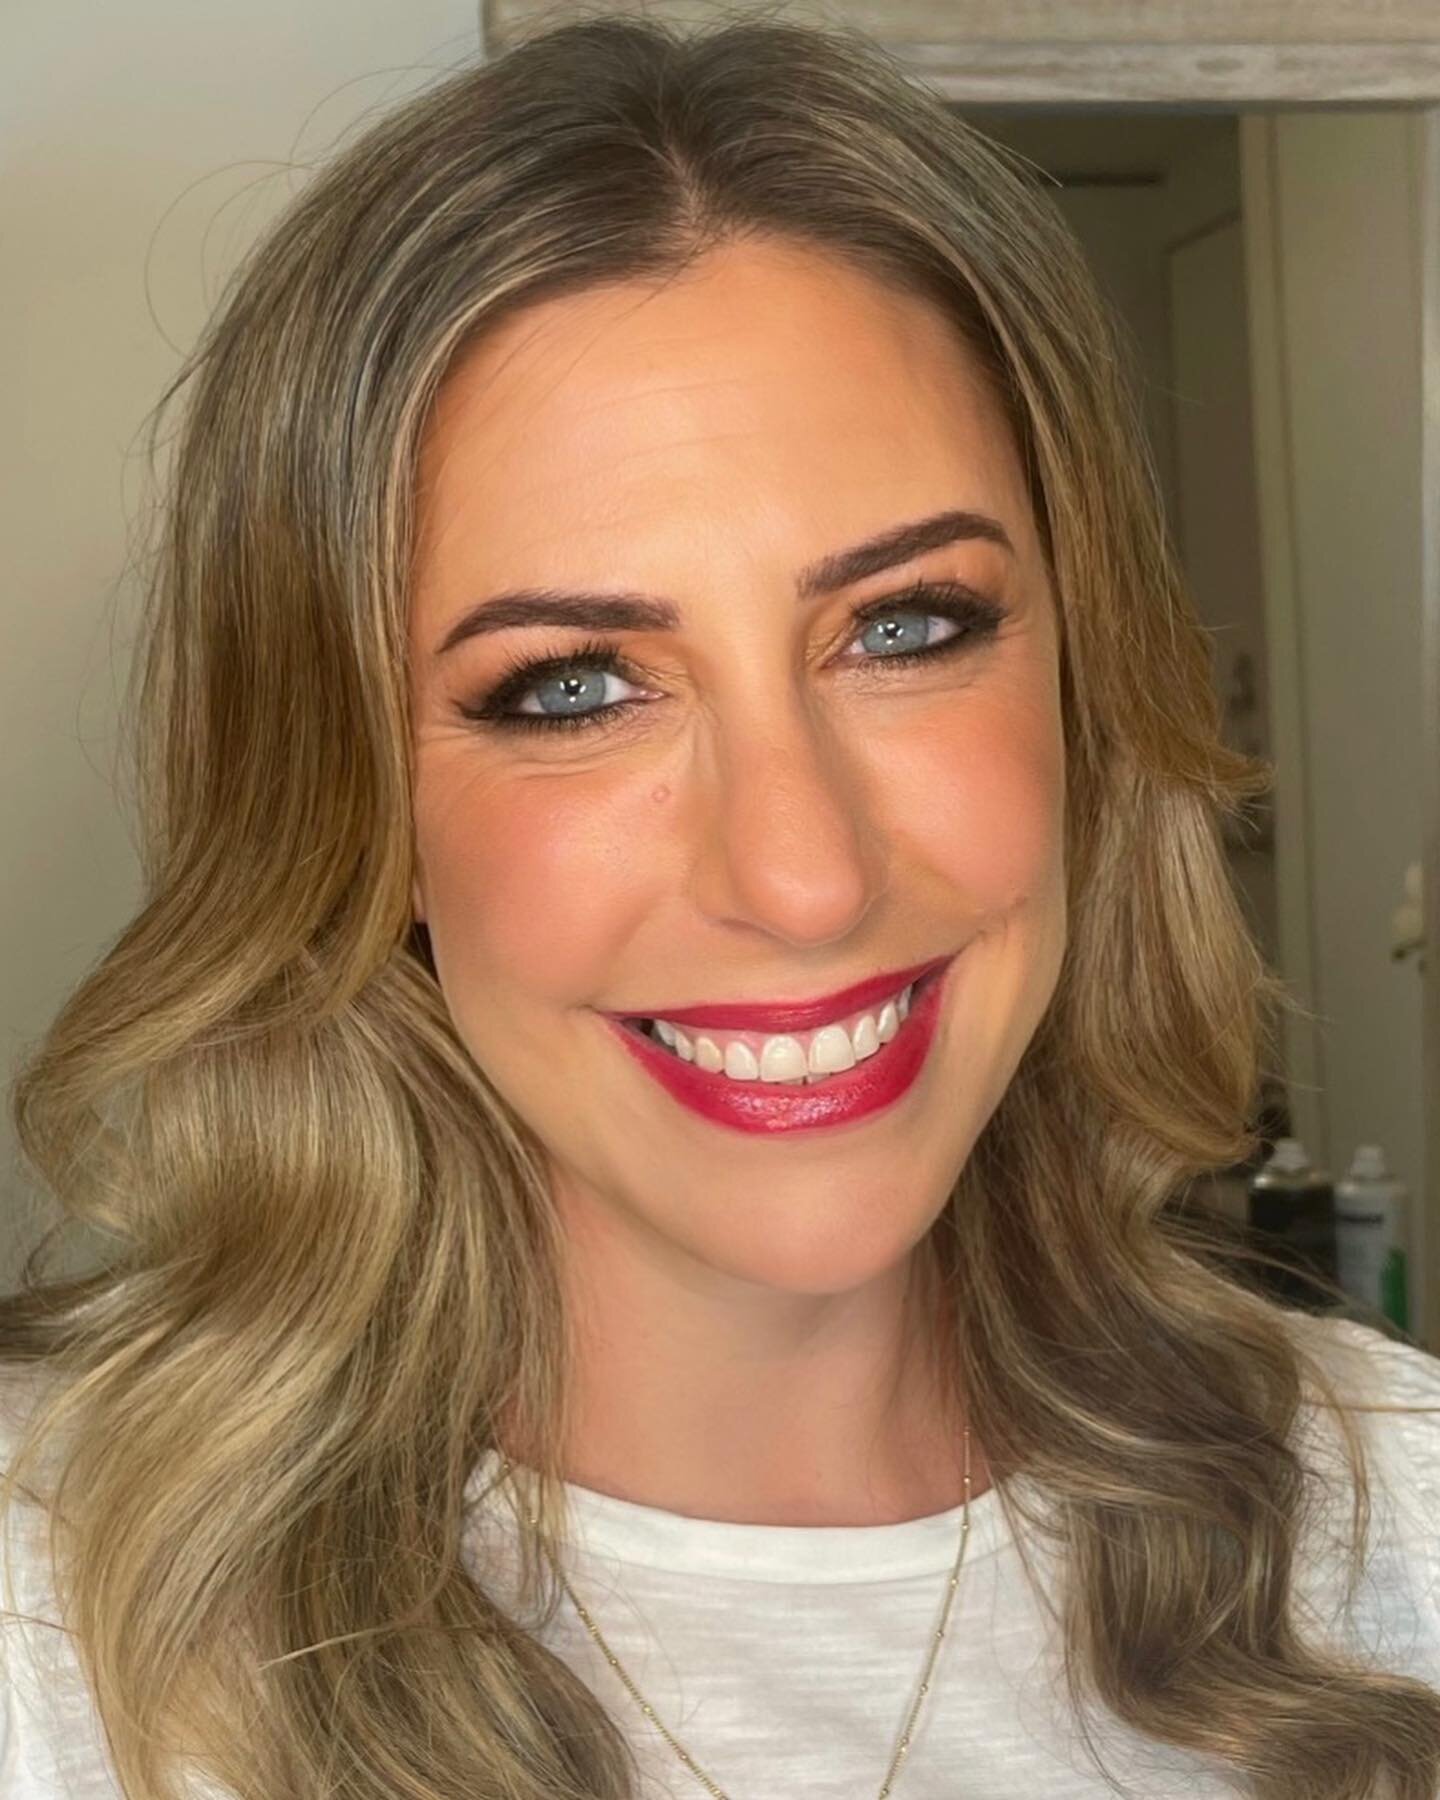 Double the events, double the glam! 💄💅 Yesterday was a whirlwind of events for our gorgeous blue-eyed beauty! 😍 From daytime chic to evening glam, she rocked both looks effortlessly. Swipe to see her stunning daytime makeup.  #EventfulDay #TwoLook